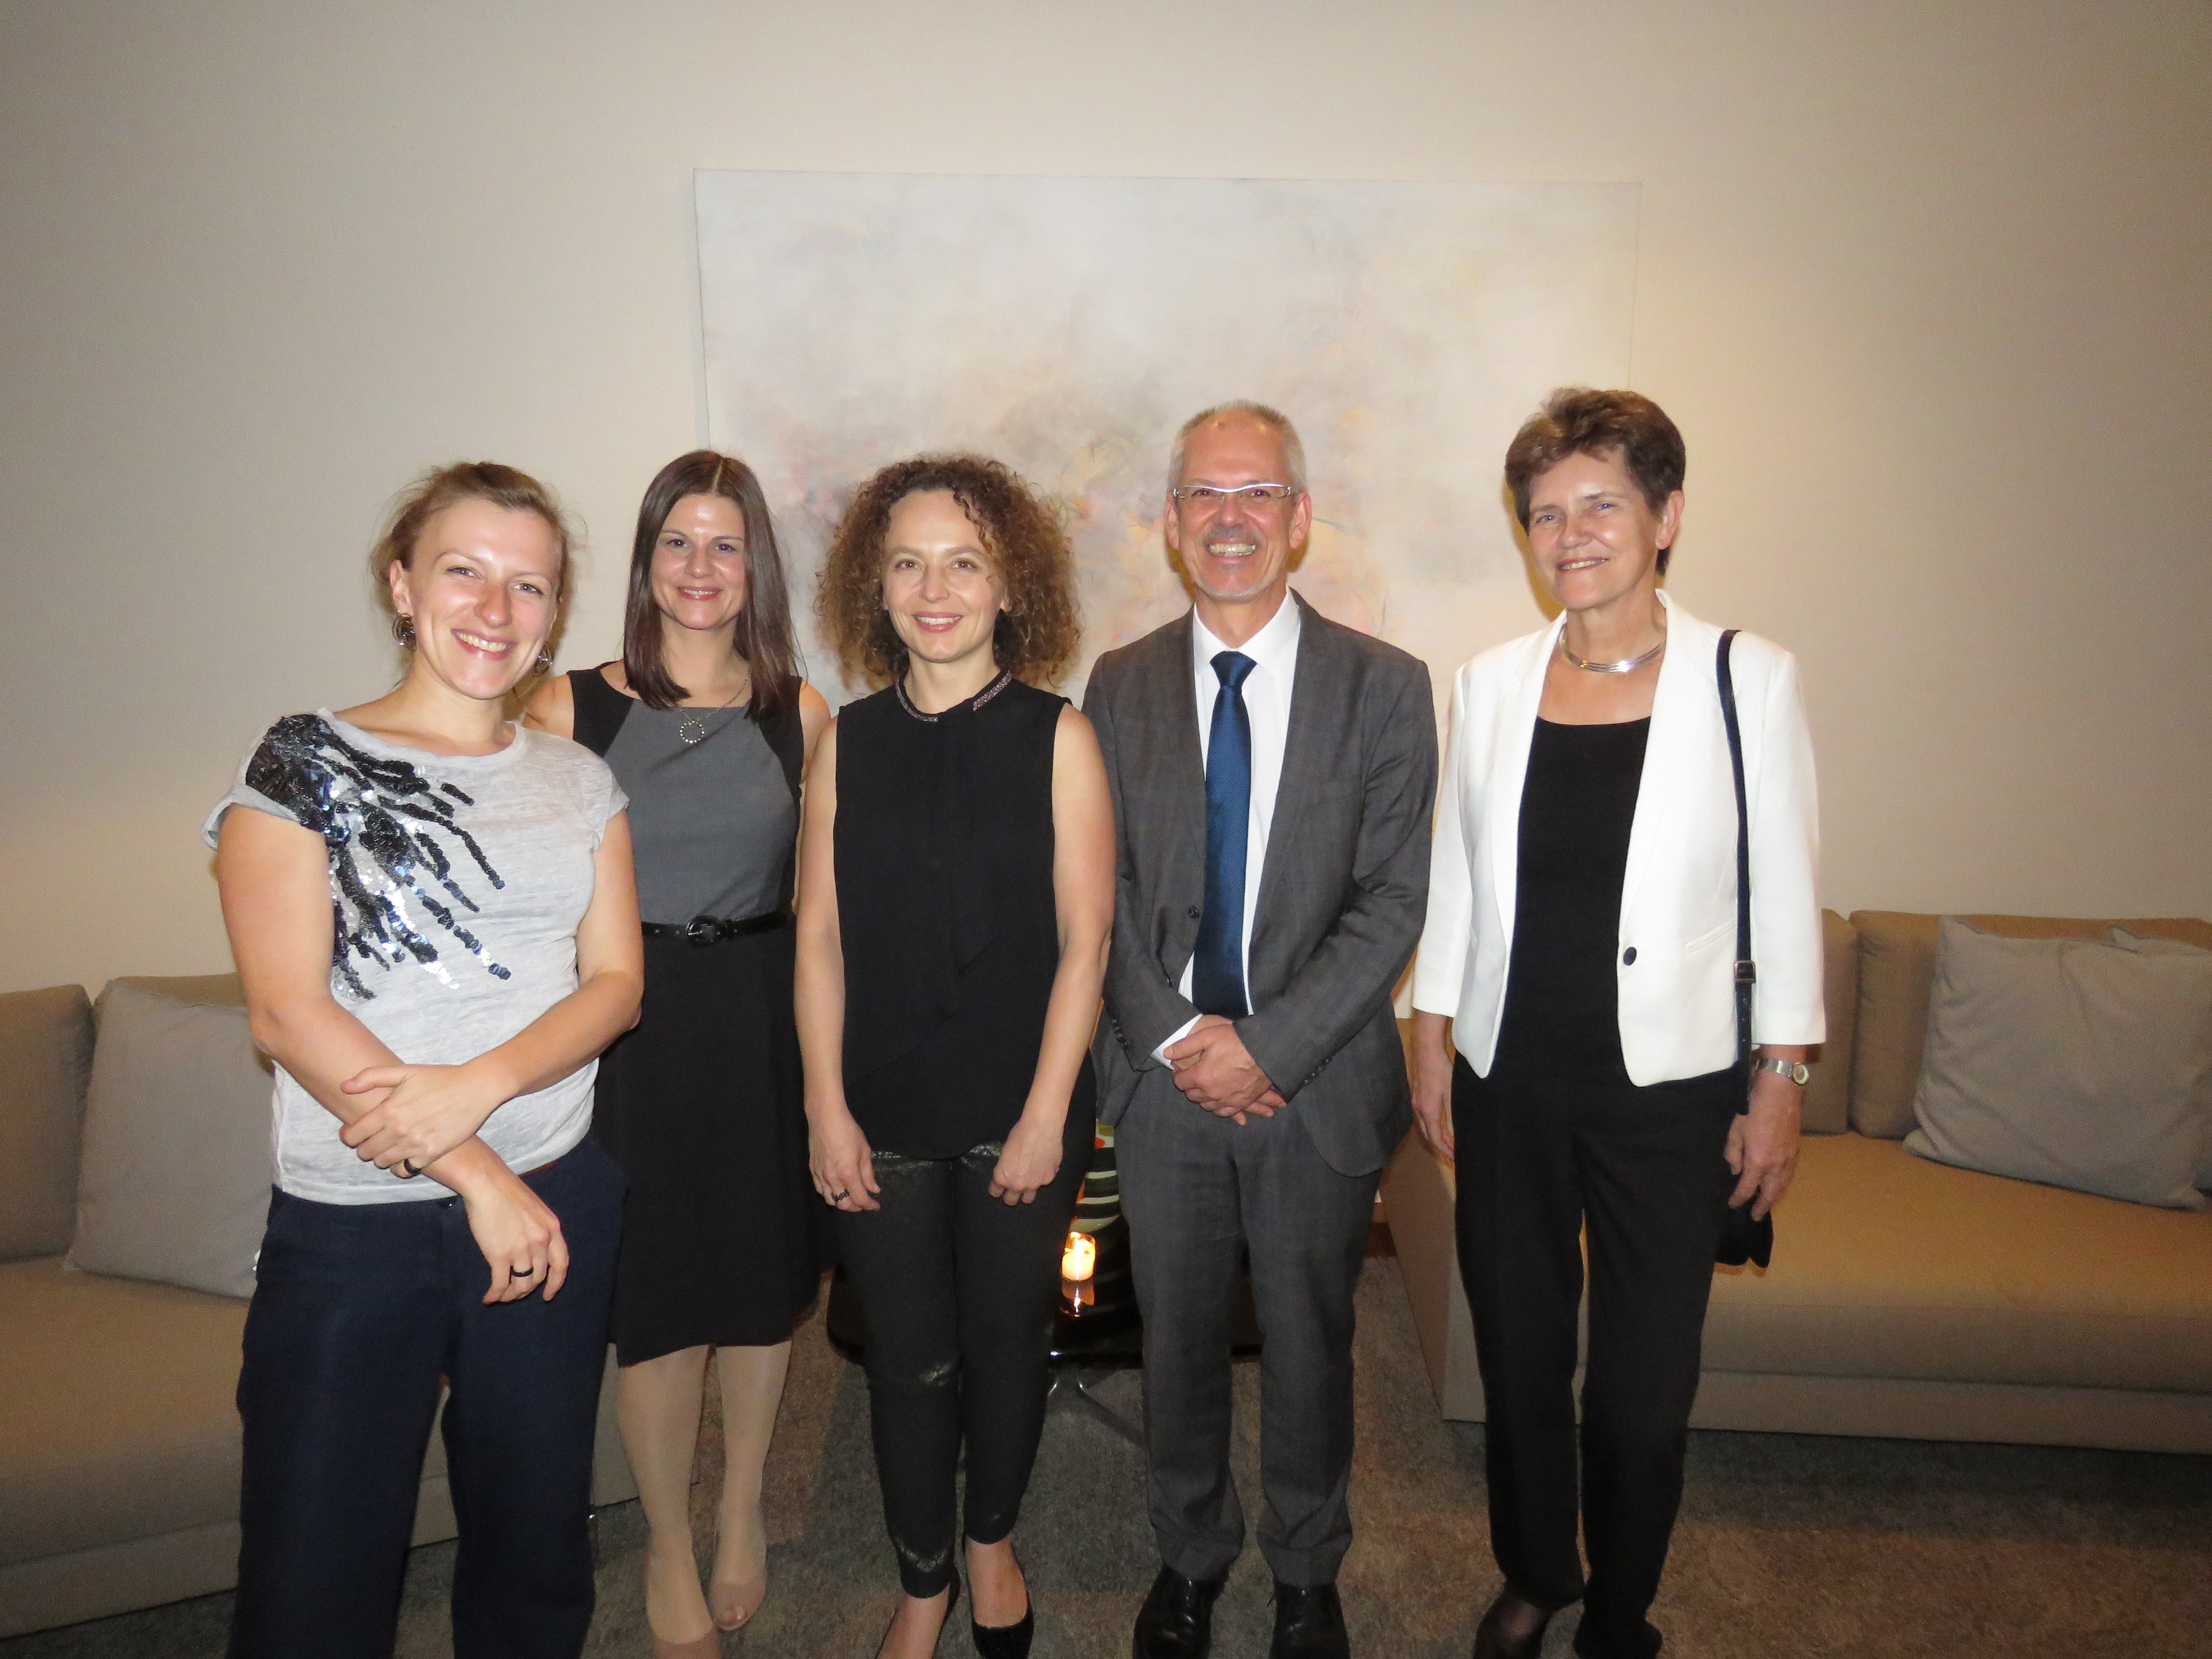 Frank Allgöwer with colleagues from the DFG Office Latin America (from left): Christiane Wolf, Maxi Neidhardt and Kathrin Winkler, as well as Karin Zach from the DFG Head Office in Bonn